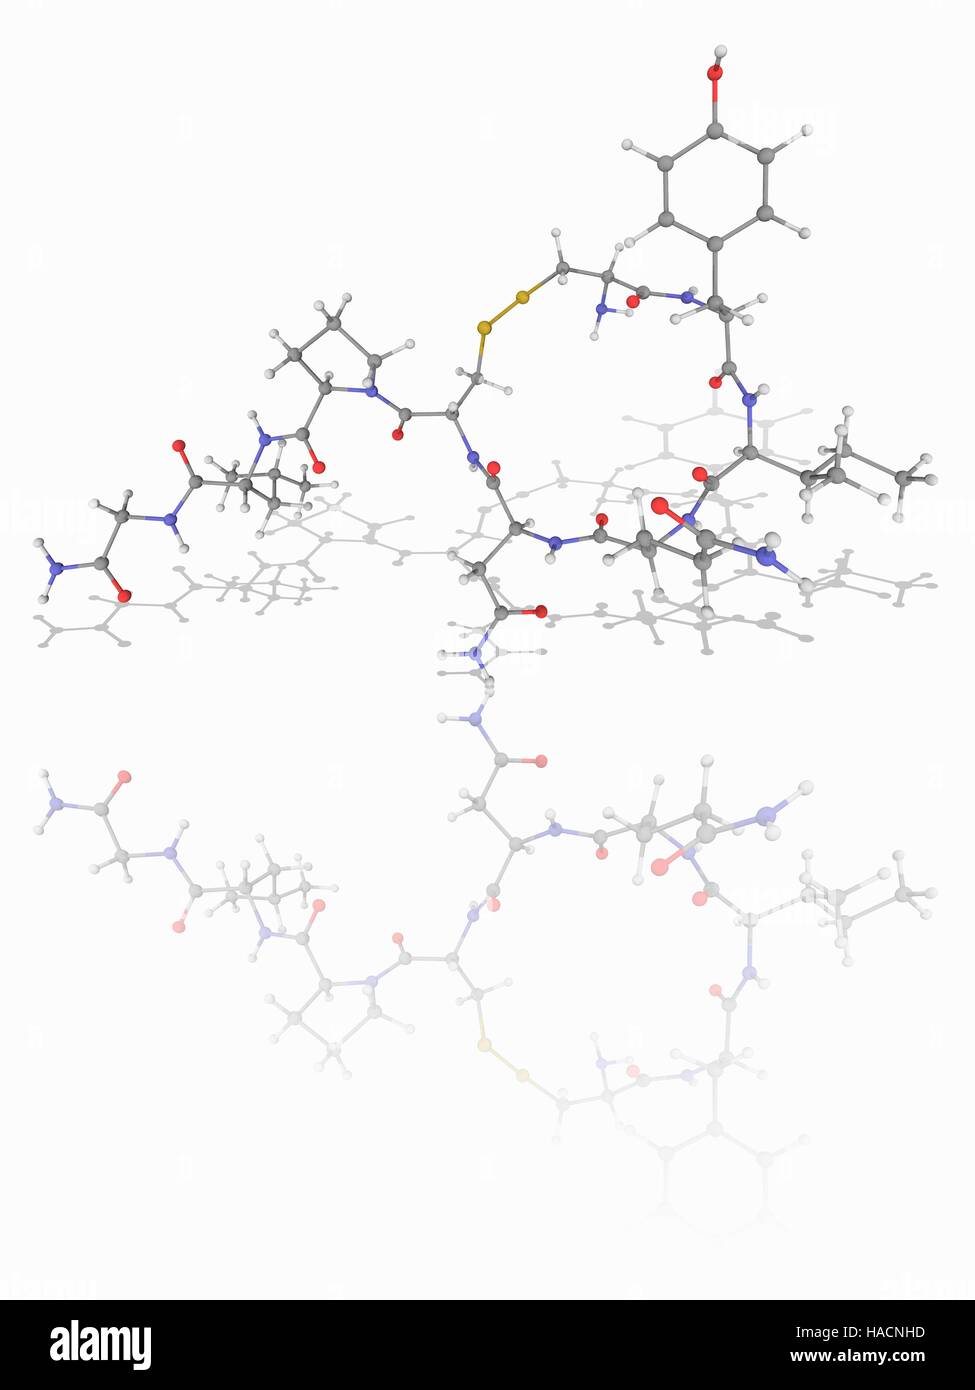 Oxytocin. Molecular model of the mammalian hormone oxytocin (C43.H66.N12.O12.S2), which acts as a neuromodulator in the brain. Atoms are represented as spheres and are colour-coded: carbon (grey), hydrogen (white), nitrogen (blue), oxygen (red) and sulphur (yellow). Illustration. Stock Photo